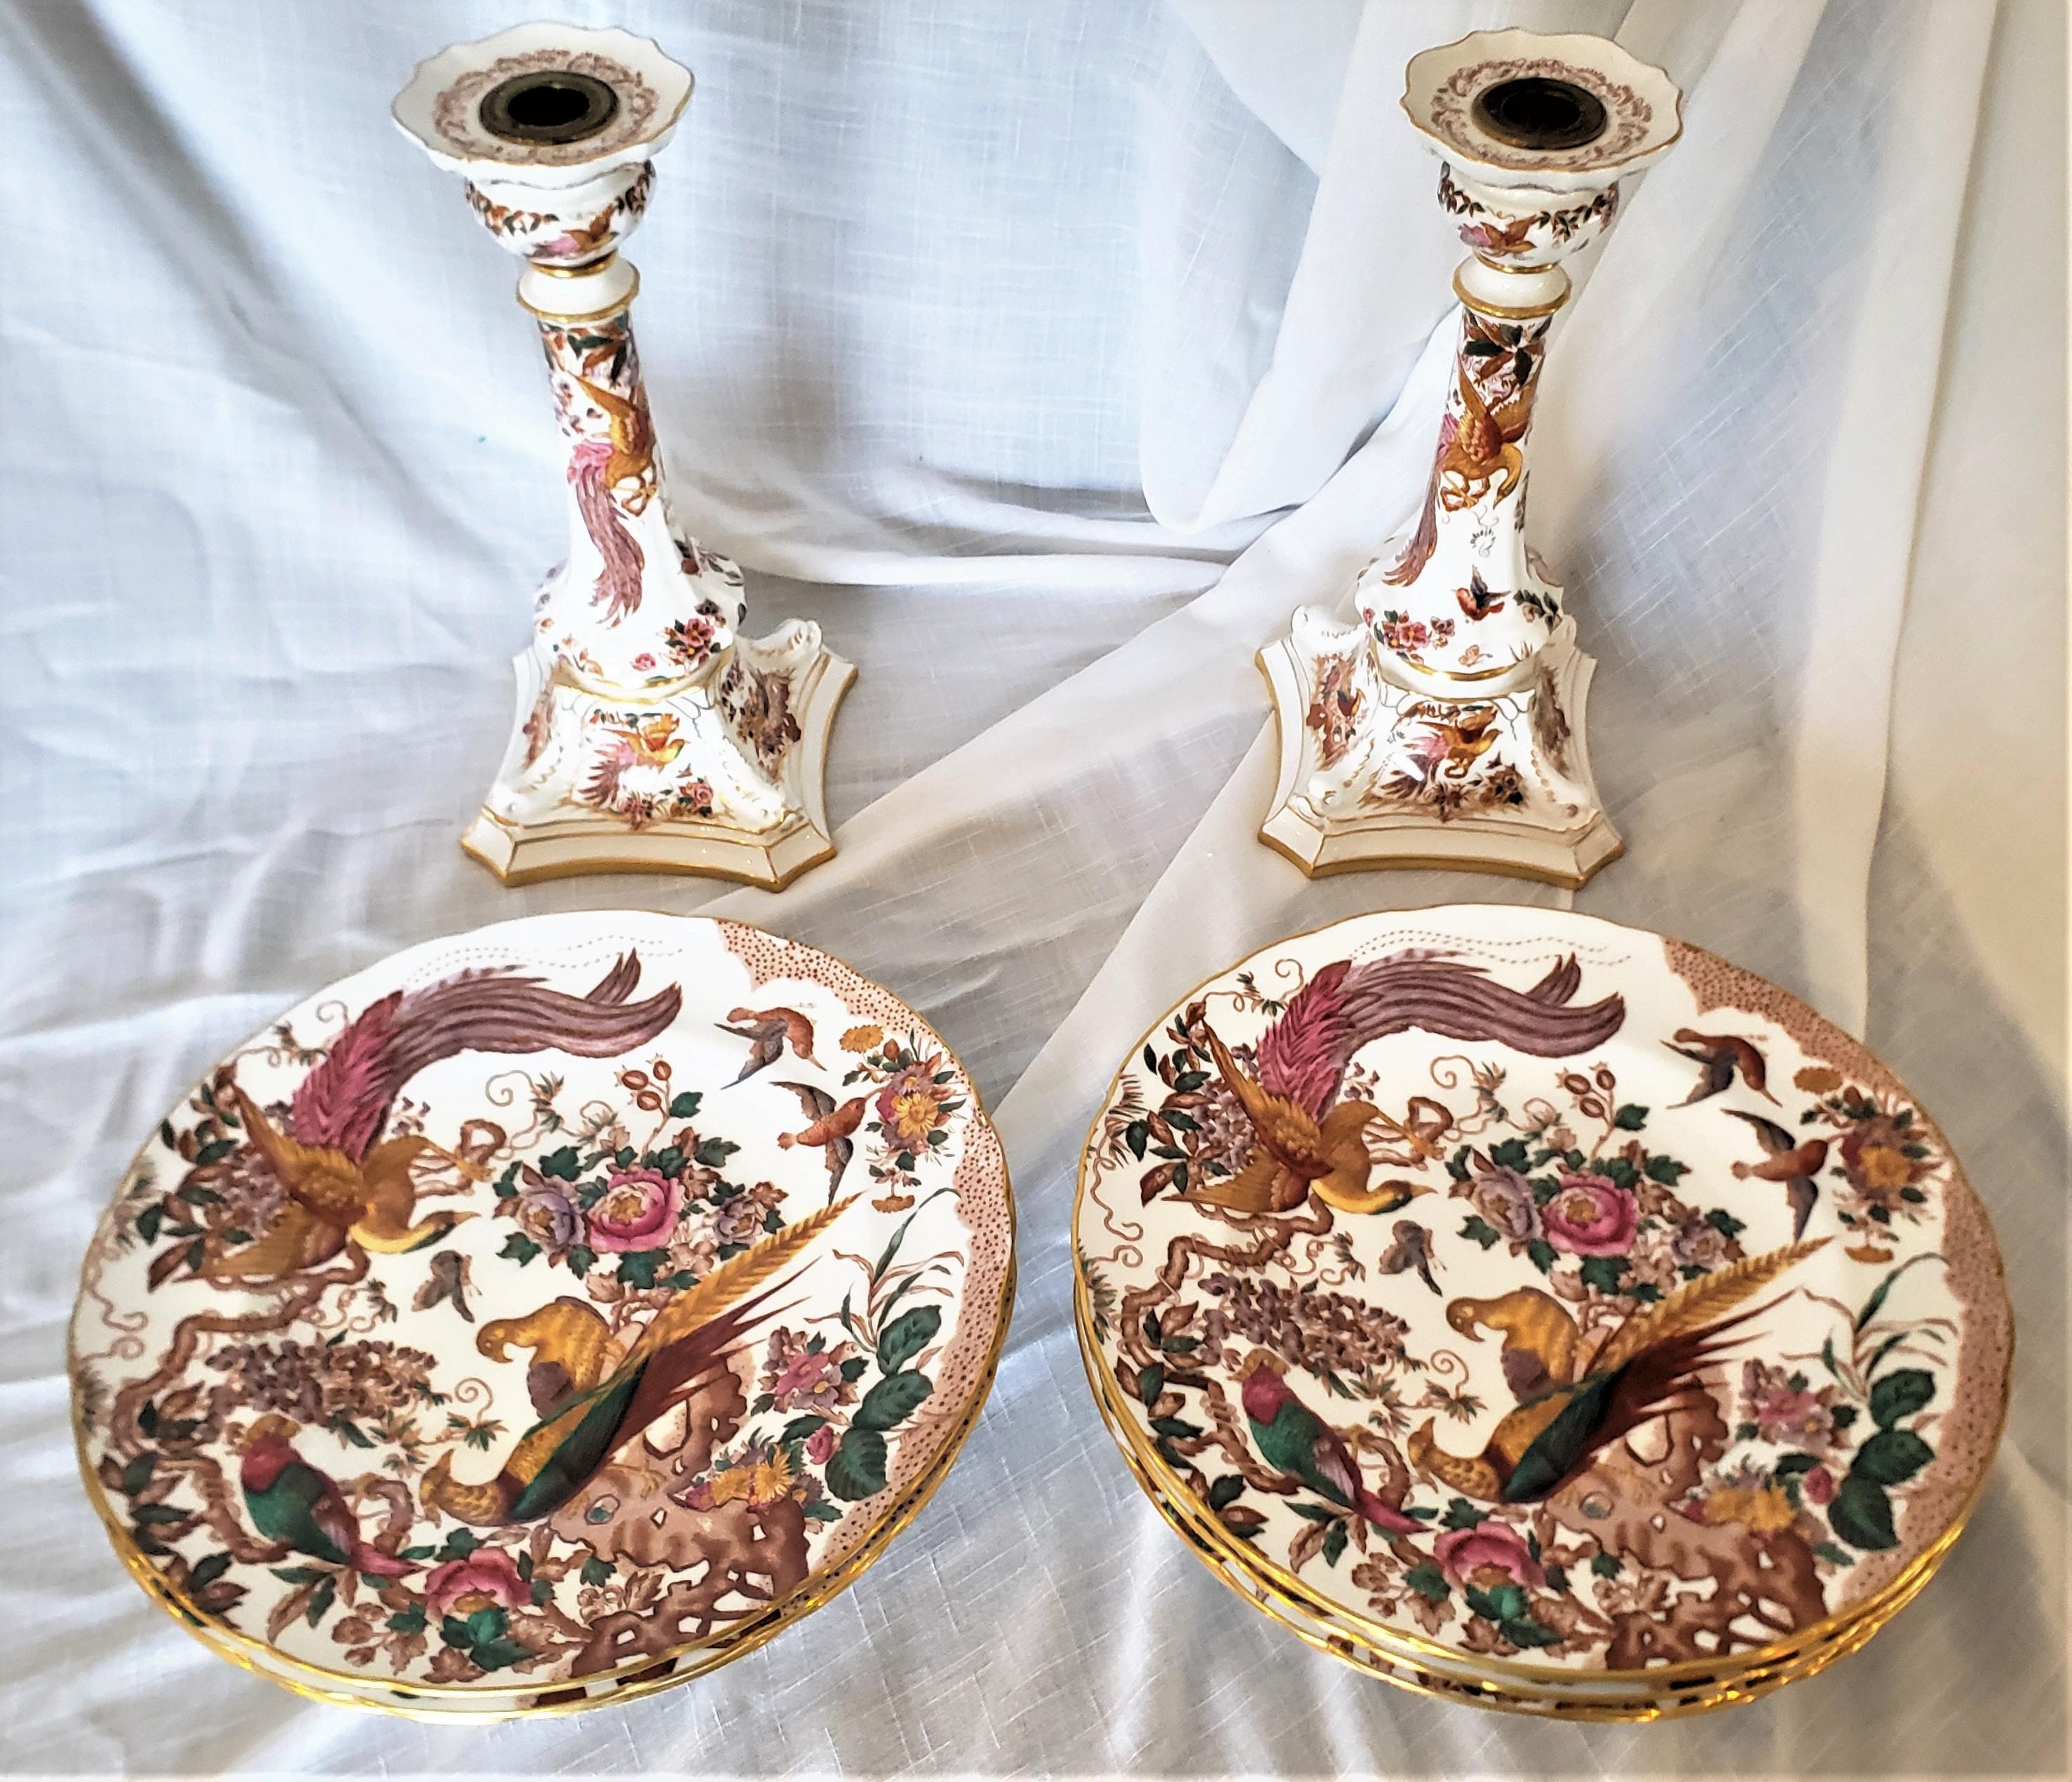 These tall candlesticks and dinner plates were made by the renowned English porcelain maker, Royal Crown Derby. The candlesticks and plates are done in their 'Olde Avesbury' pattern with vibrant exotic birds as decoration. The backstamps date to